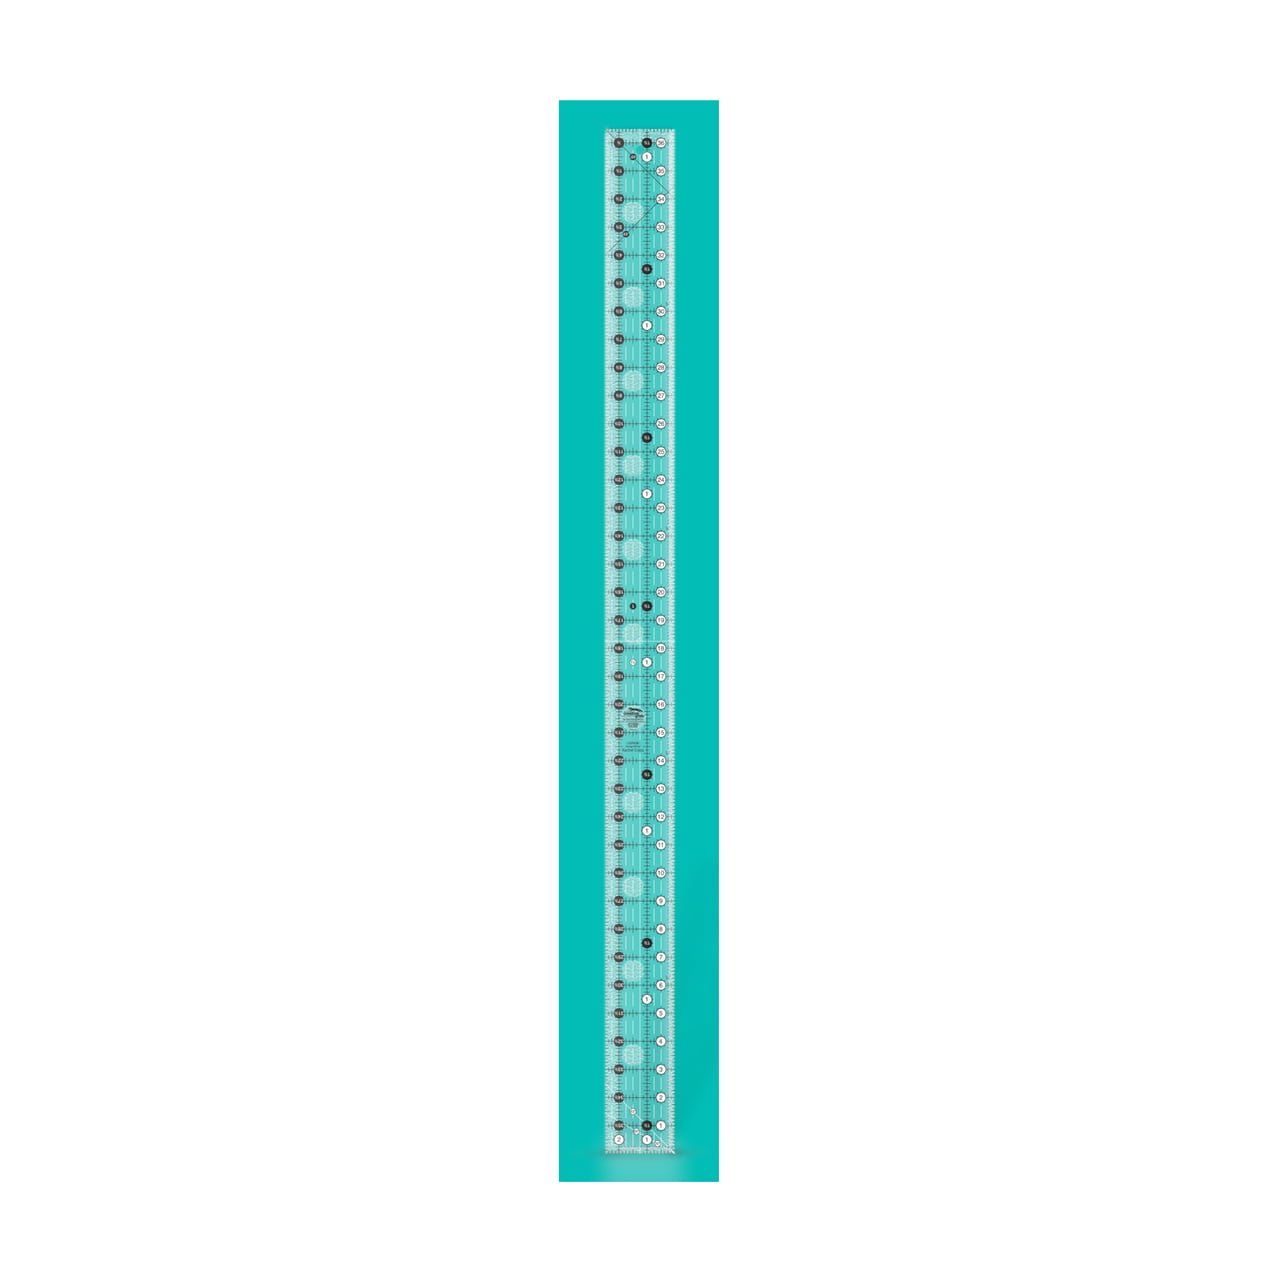 Creative Grids 2 1/2" x 36 1/2" Yardstick Rectangle Sewing and Quilting Ruler 